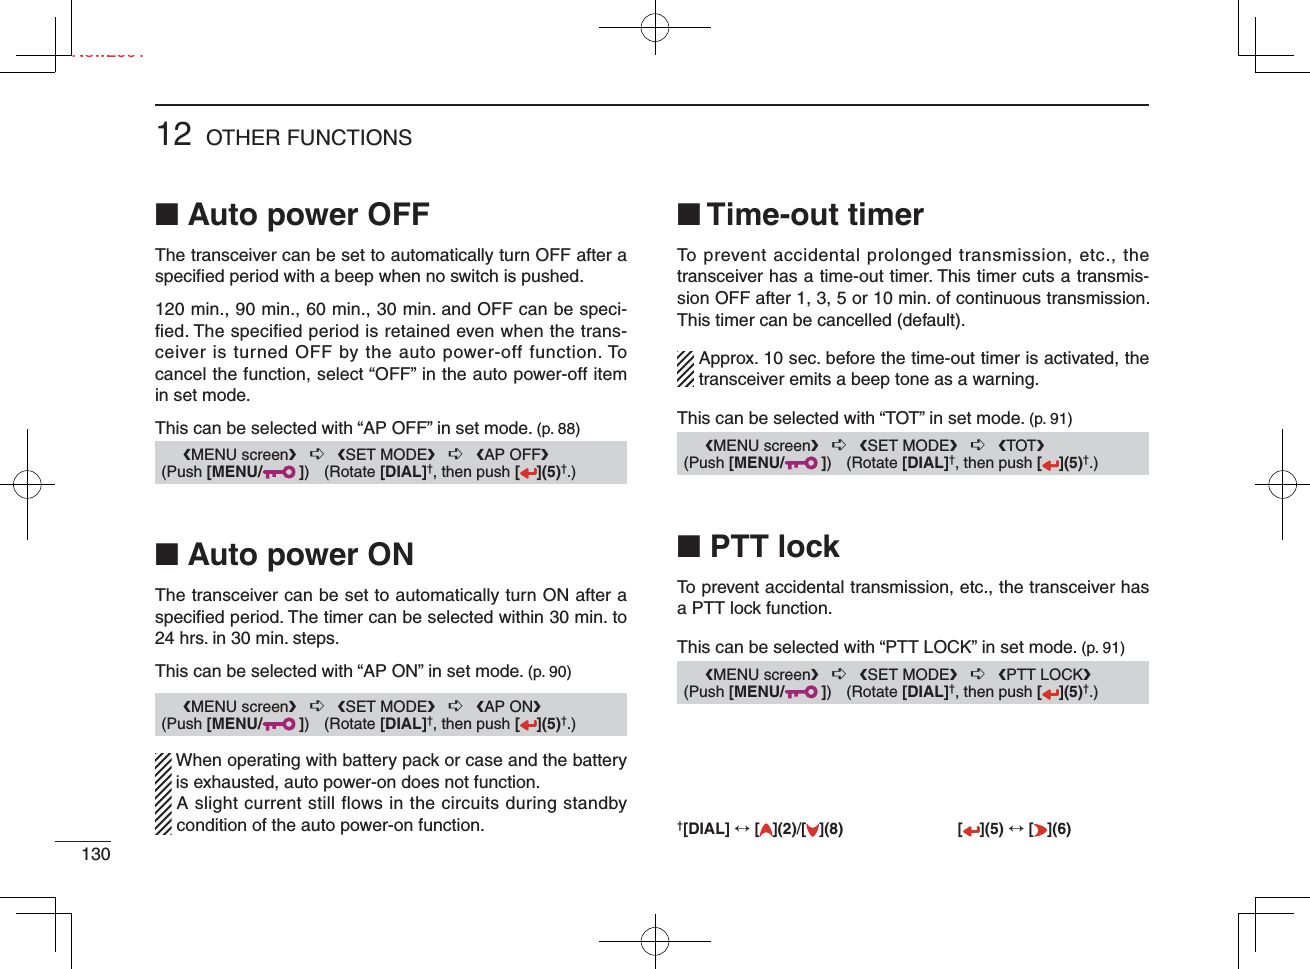 Ne13012 OTHER FUNCTIONSNew2001■ Auto power OFFThe transceiver can be set to automatically turn OFF after a speciﬁ ed period with a beep when no switch is pushed.120 min., 90 min., 60 min., 30 min. and OFF can be speci-fied. The specified period is retained even when the trans-ceiver is turned OFF by the auto power-off function. To cancel the function, select “OFF” in the auto power-off item in set mode.This can be selected with “AP OFF” in set mode. (p. 88)■ Auto power ONThe transceiver can be set to automatically turn ON after a speciﬁ ed period. The timer can be selected within 30 min. to 24 hrs. in 30 min. steps.This can be selected with “AP ON” in set mode. (p. 90)  When operating with battery pack or case and the battery is exhausted, auto power-on does not function.   A slight current still flows in the circuits during standby condition of the auto power-on function.■ Time-out timerTo prevent accidental prolonged transmission, etc., the transceiver has a time-out timer. This timer cuts a transmis-sion OFF after 1, 3, 5 or 10 min. of continuous transmission. This timer can be cancelled (default).  Approx. 10 sec. before the time-out timer is activated, the transceiver emits a beep tone as a warning.This can be selected with “TOT” in set mode. (p. 91)■ PTT lockTo prevent accidental transmission, etc., the transceiver has a PTT lock function.This can be selected with “PTT LOCK” in set mode. (p. 91)      ❮MENU screen❯   ➪   ❮SET MODE❯   ➪   ❮AP OFF❯ (Push [MENU/ ]) (Rotate [DIAL]†, then push [ ](5)†.)      ❮MENU screen❯   ➪   ❮SET MODE❯   ➪   ❮AP ON❯ (Push [MENU/ ]) (Rotate [DIAL]†, then push [ ](5)†.)      ❮MENU screen❯   ➪   ❮SET MODE❯   ➪   ❮TOT❯ (Push [MENU/ ]) (Rotate [DIAL]†, then push [ ](5)†.)      ❮MENU screen❯   ➪   ❮SET MODE❯   ➪   ❮PTT LOCK❯ (Push [MENU/ ]) (Rotate [DIAL]†, then push [ ](5)†.)†[DIAL] ↔ [ ](2)/[](8) [ ](5) ↔ [ ](6)